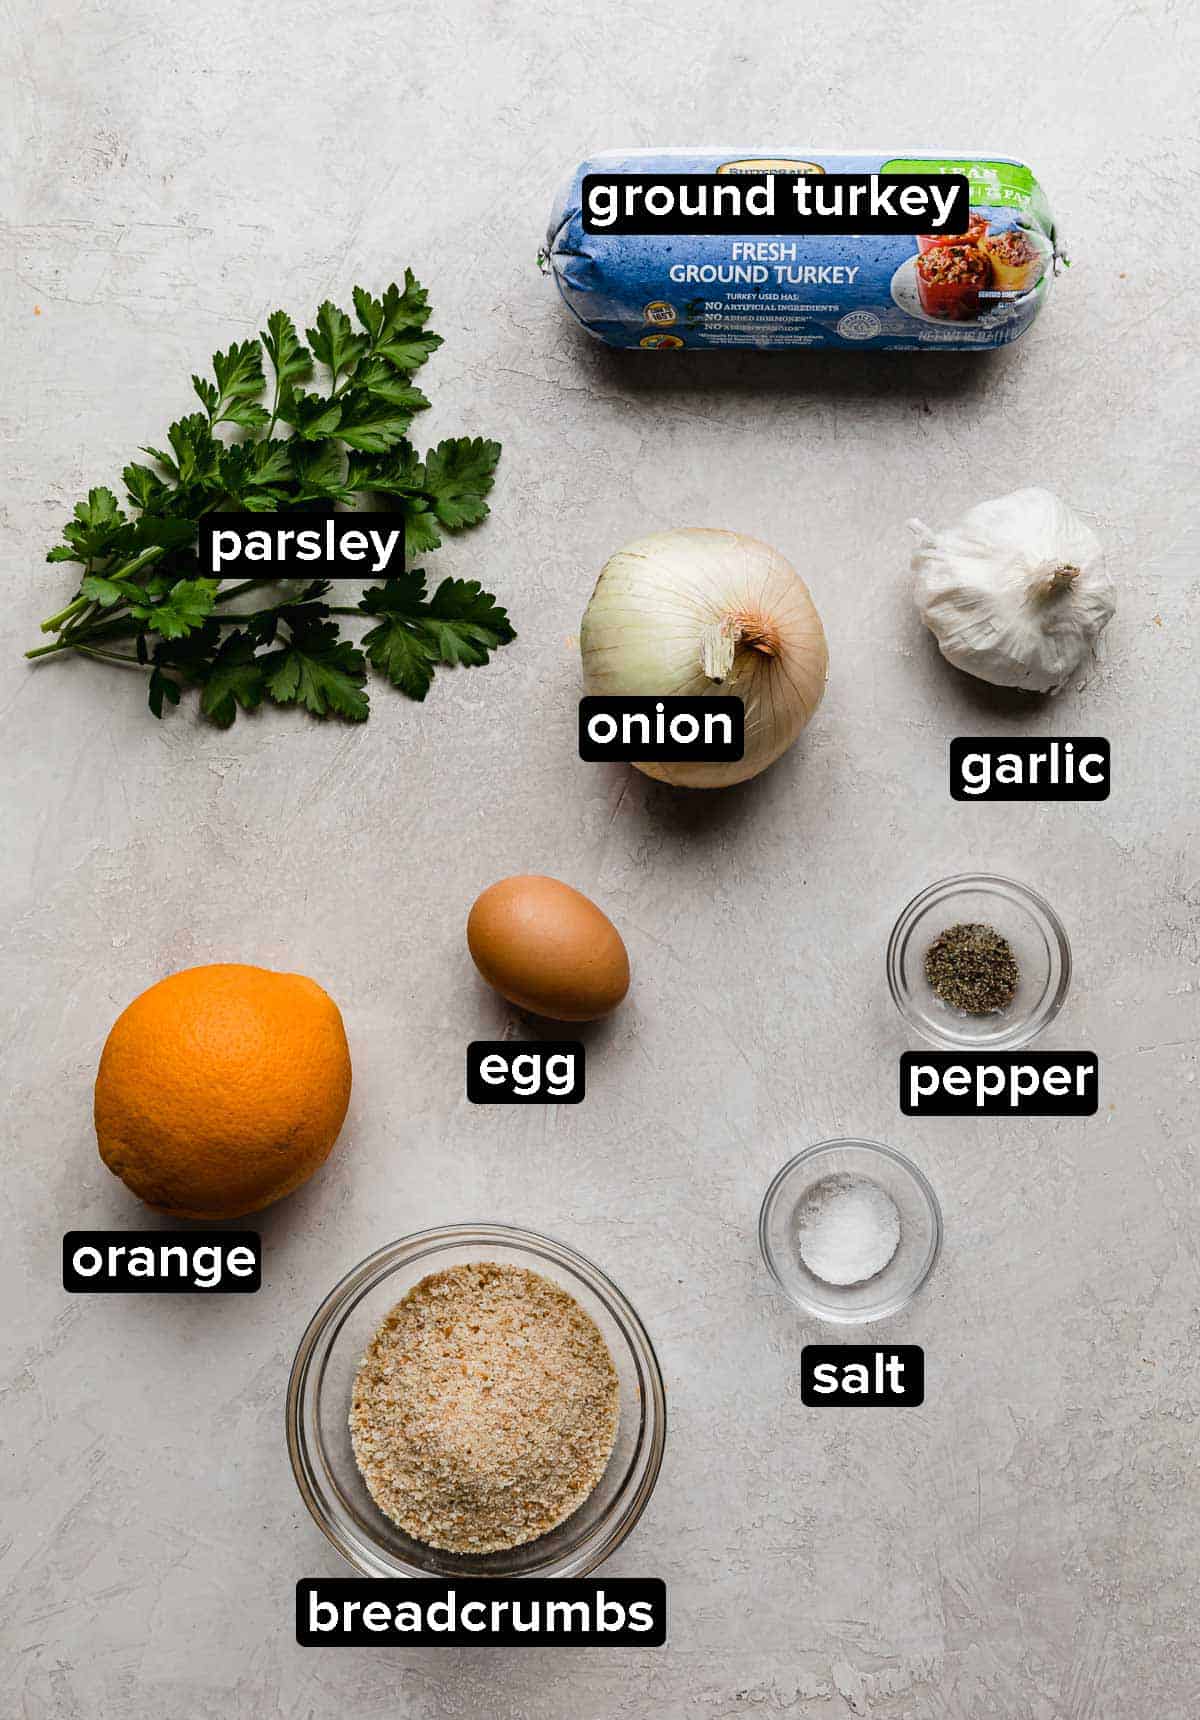 Christmas turkey meatballs ingredients on a light gray background, which include: parsley, orange, breadcrumbs, egg, onion, and turkey.